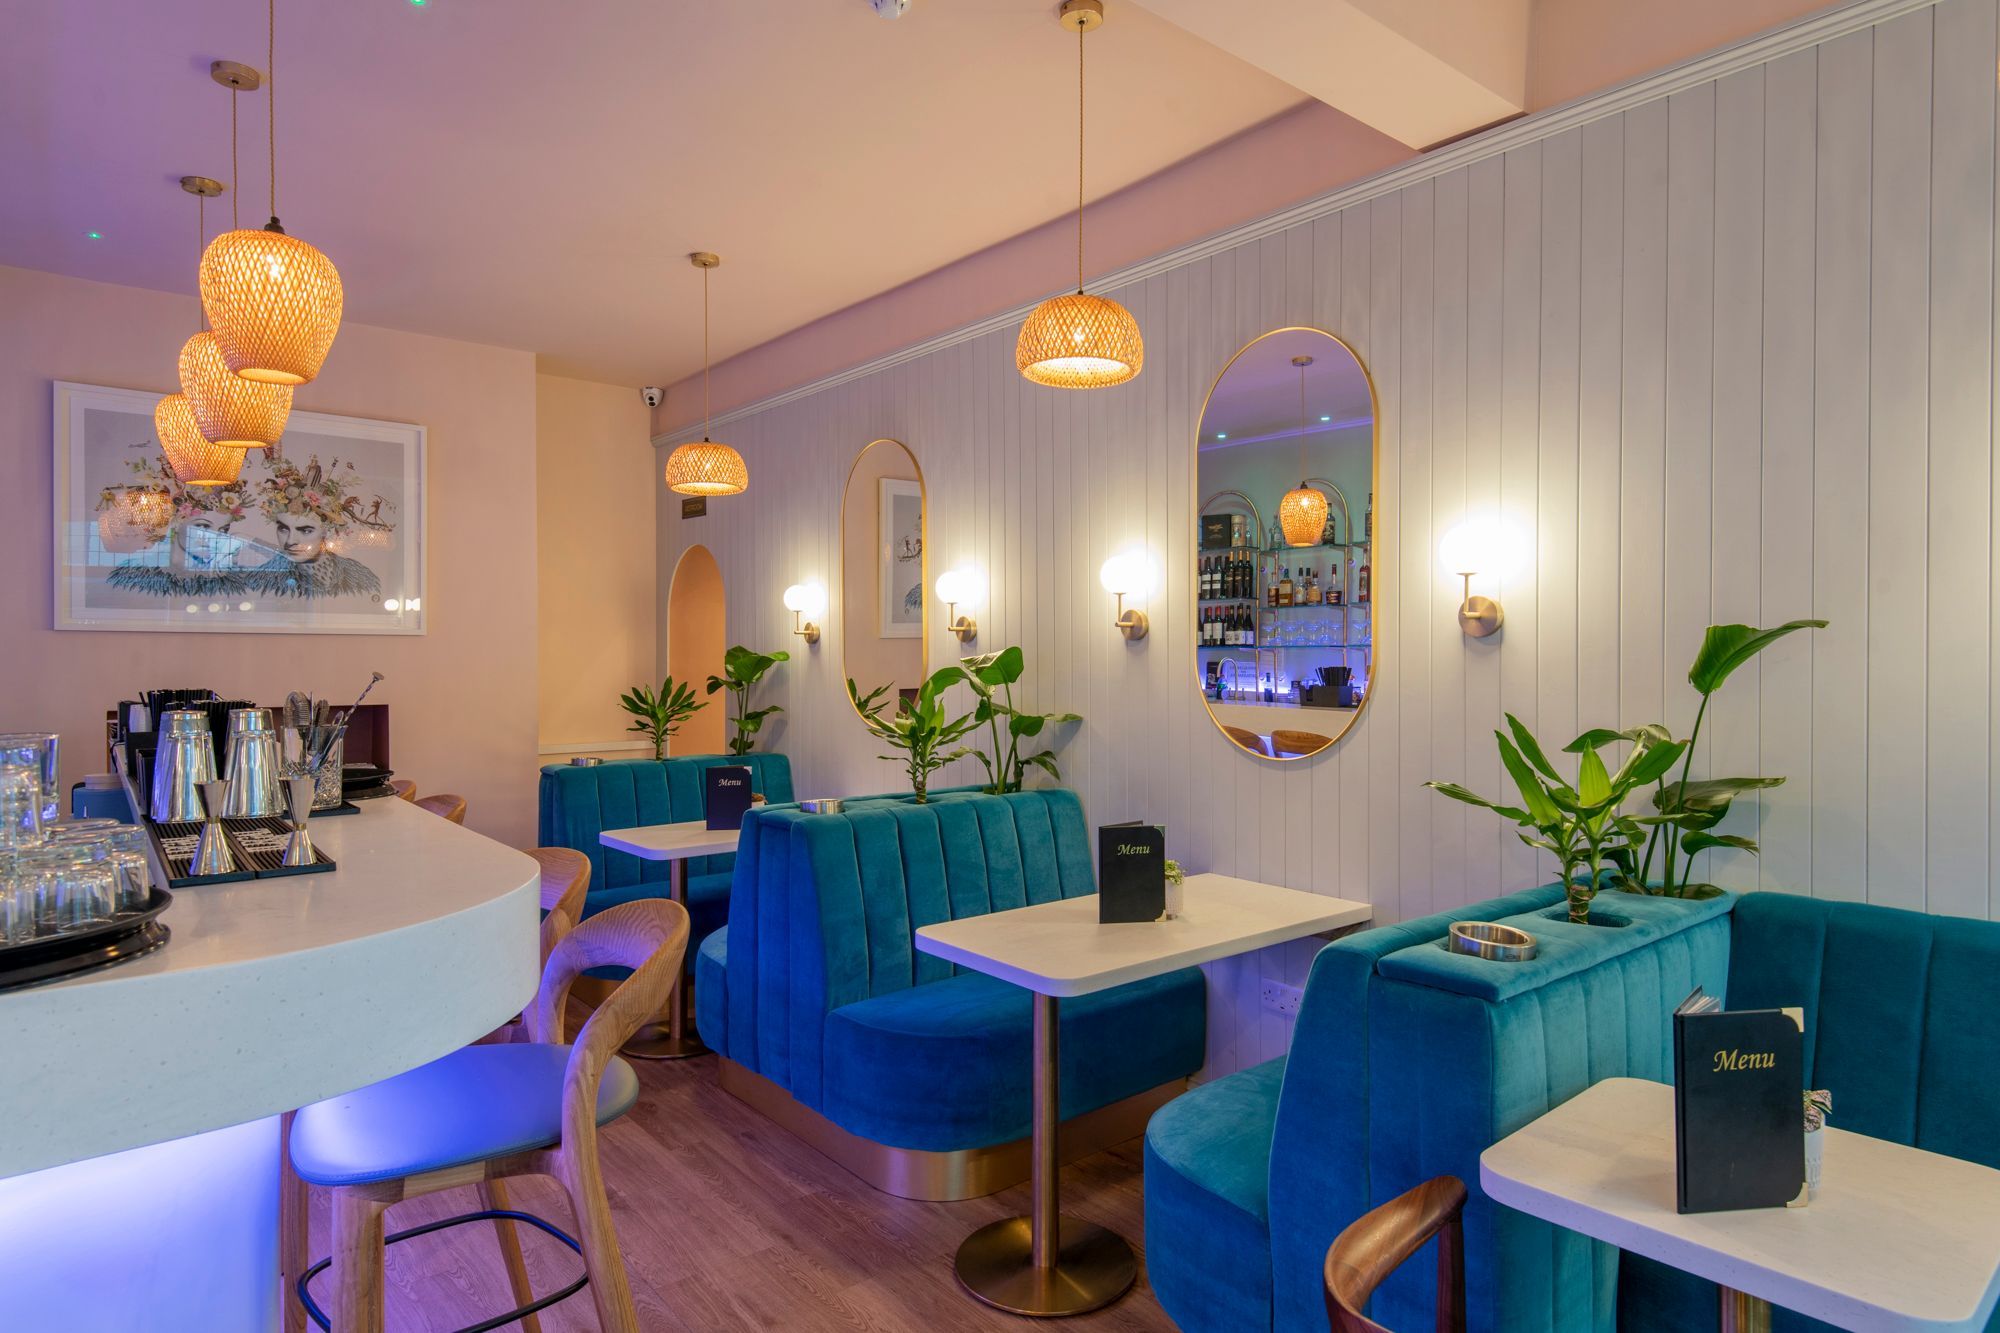 inside the 2 Church Street, tiffany blue diners and bar chairs, white table, mirrors on the wall